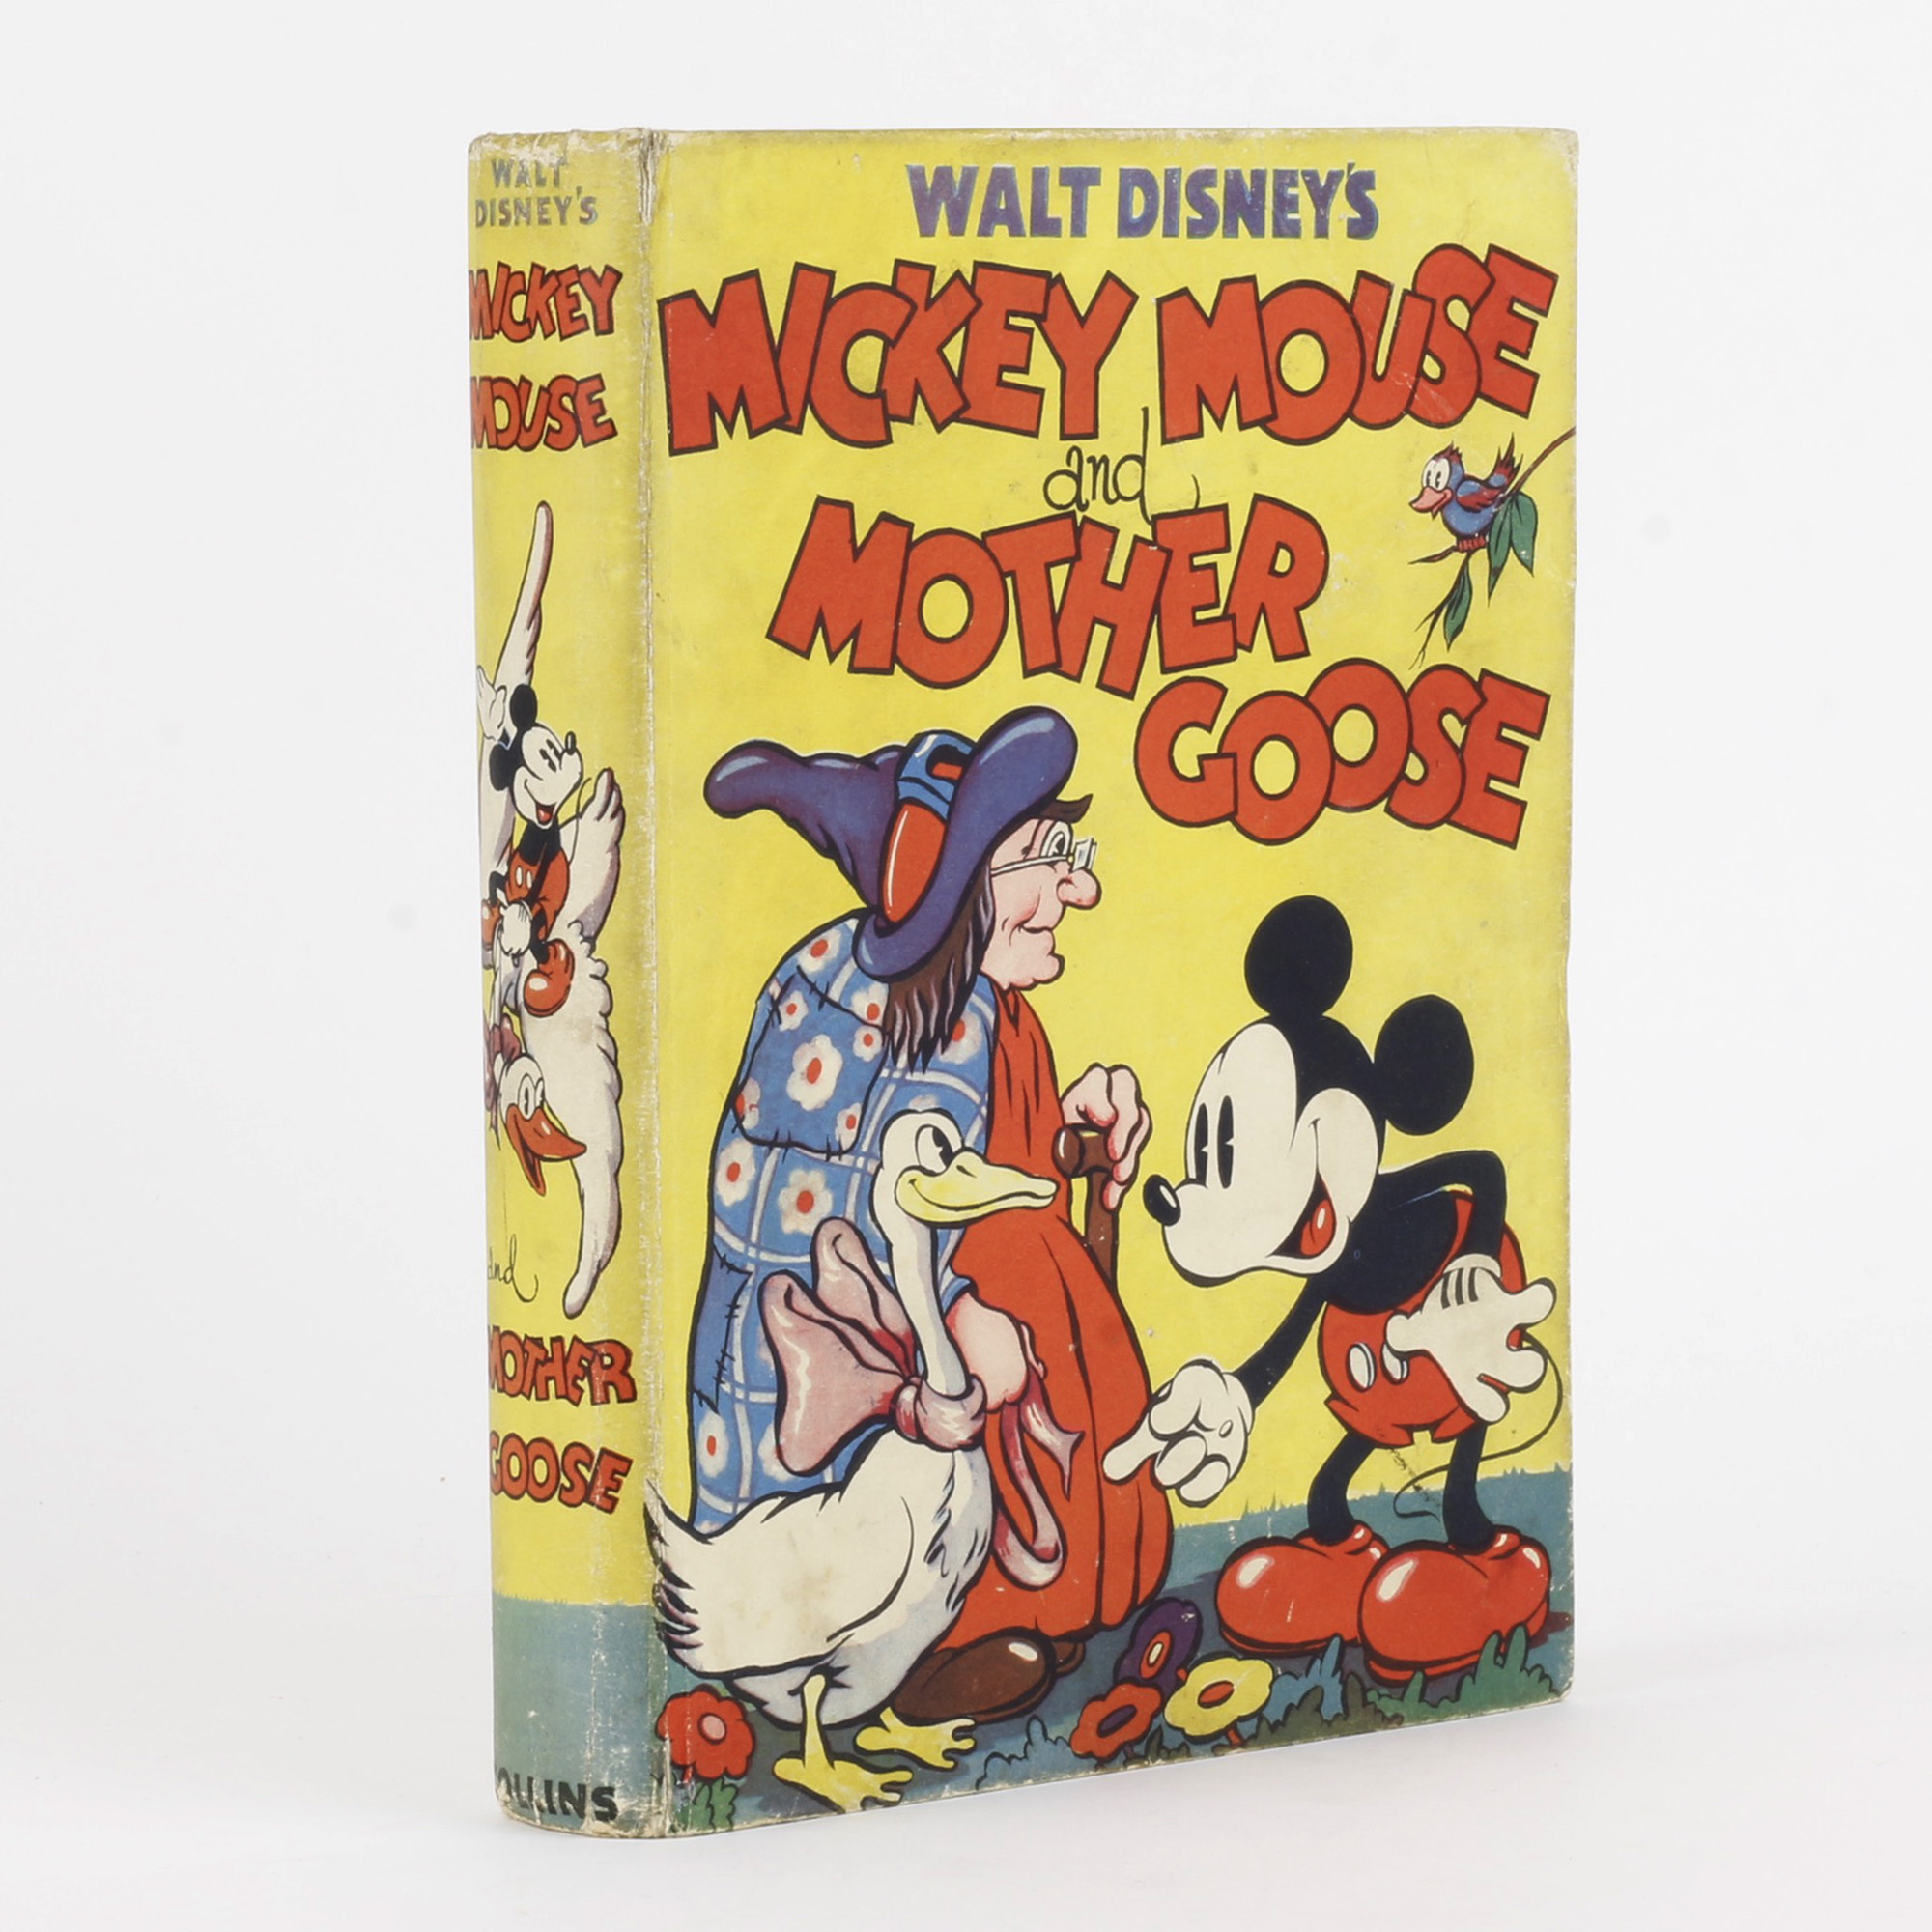 Mickey Mouse and Mother Goose by DISNEY, Walt - Jonkers Rare Books